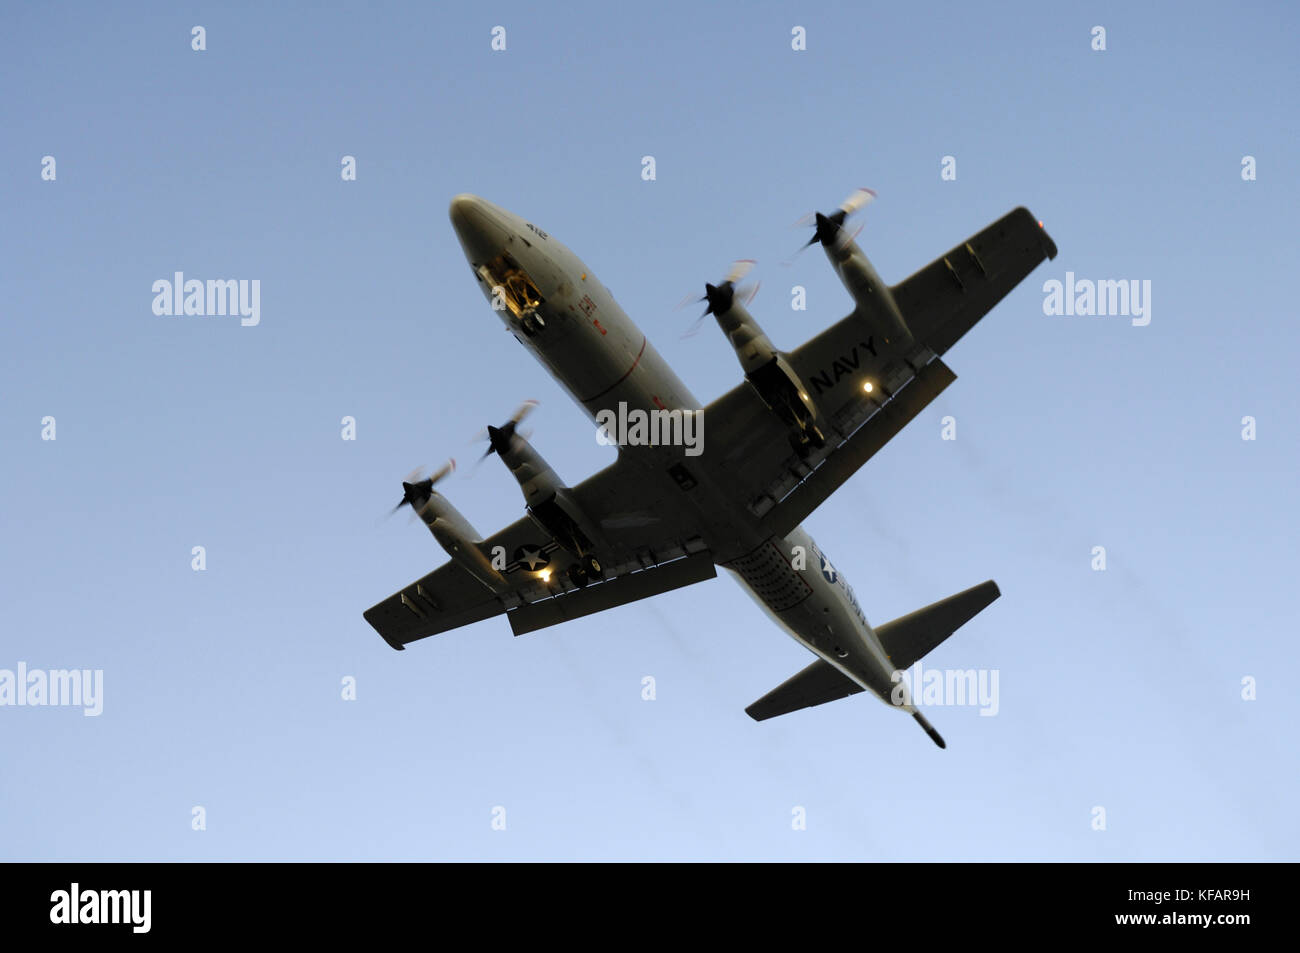 a US Navy Lockheed P-3C Orion on final-approach with black engine-smoke and flaps deployed at dusk Stock Photo